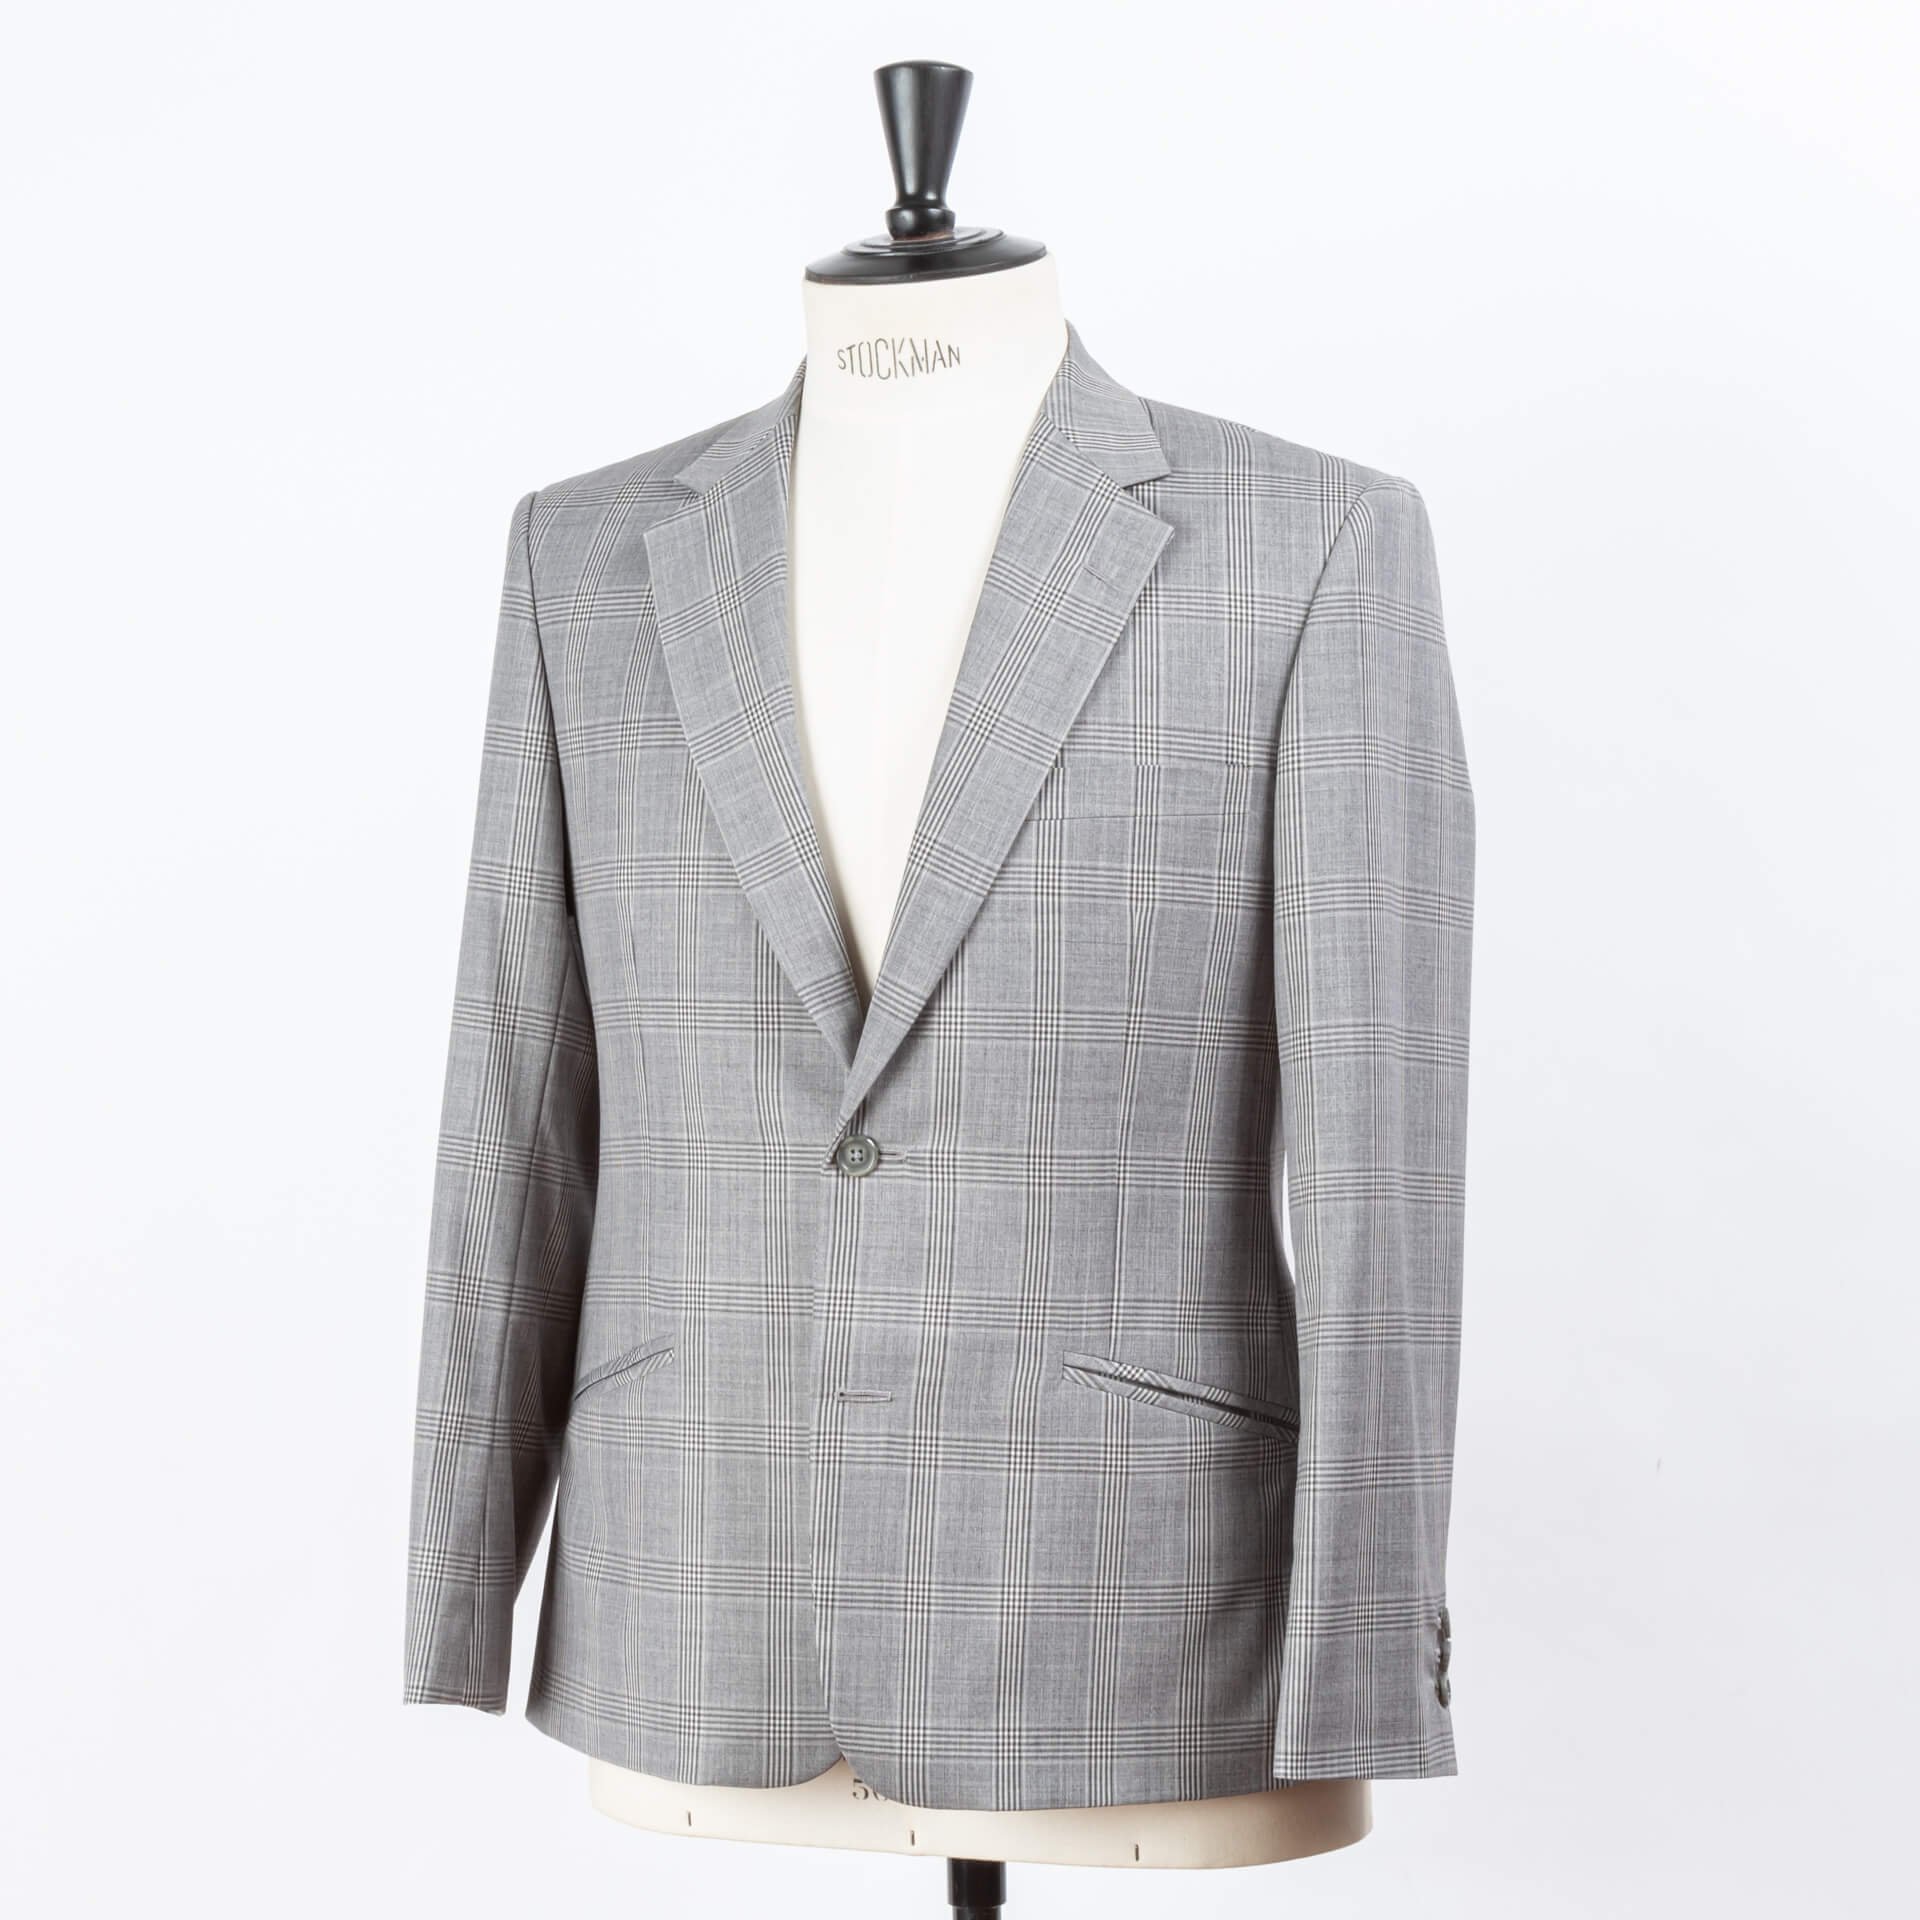 Grey Windowpane Suit — Bespoke Tailor for Custom Suits & Shirts.